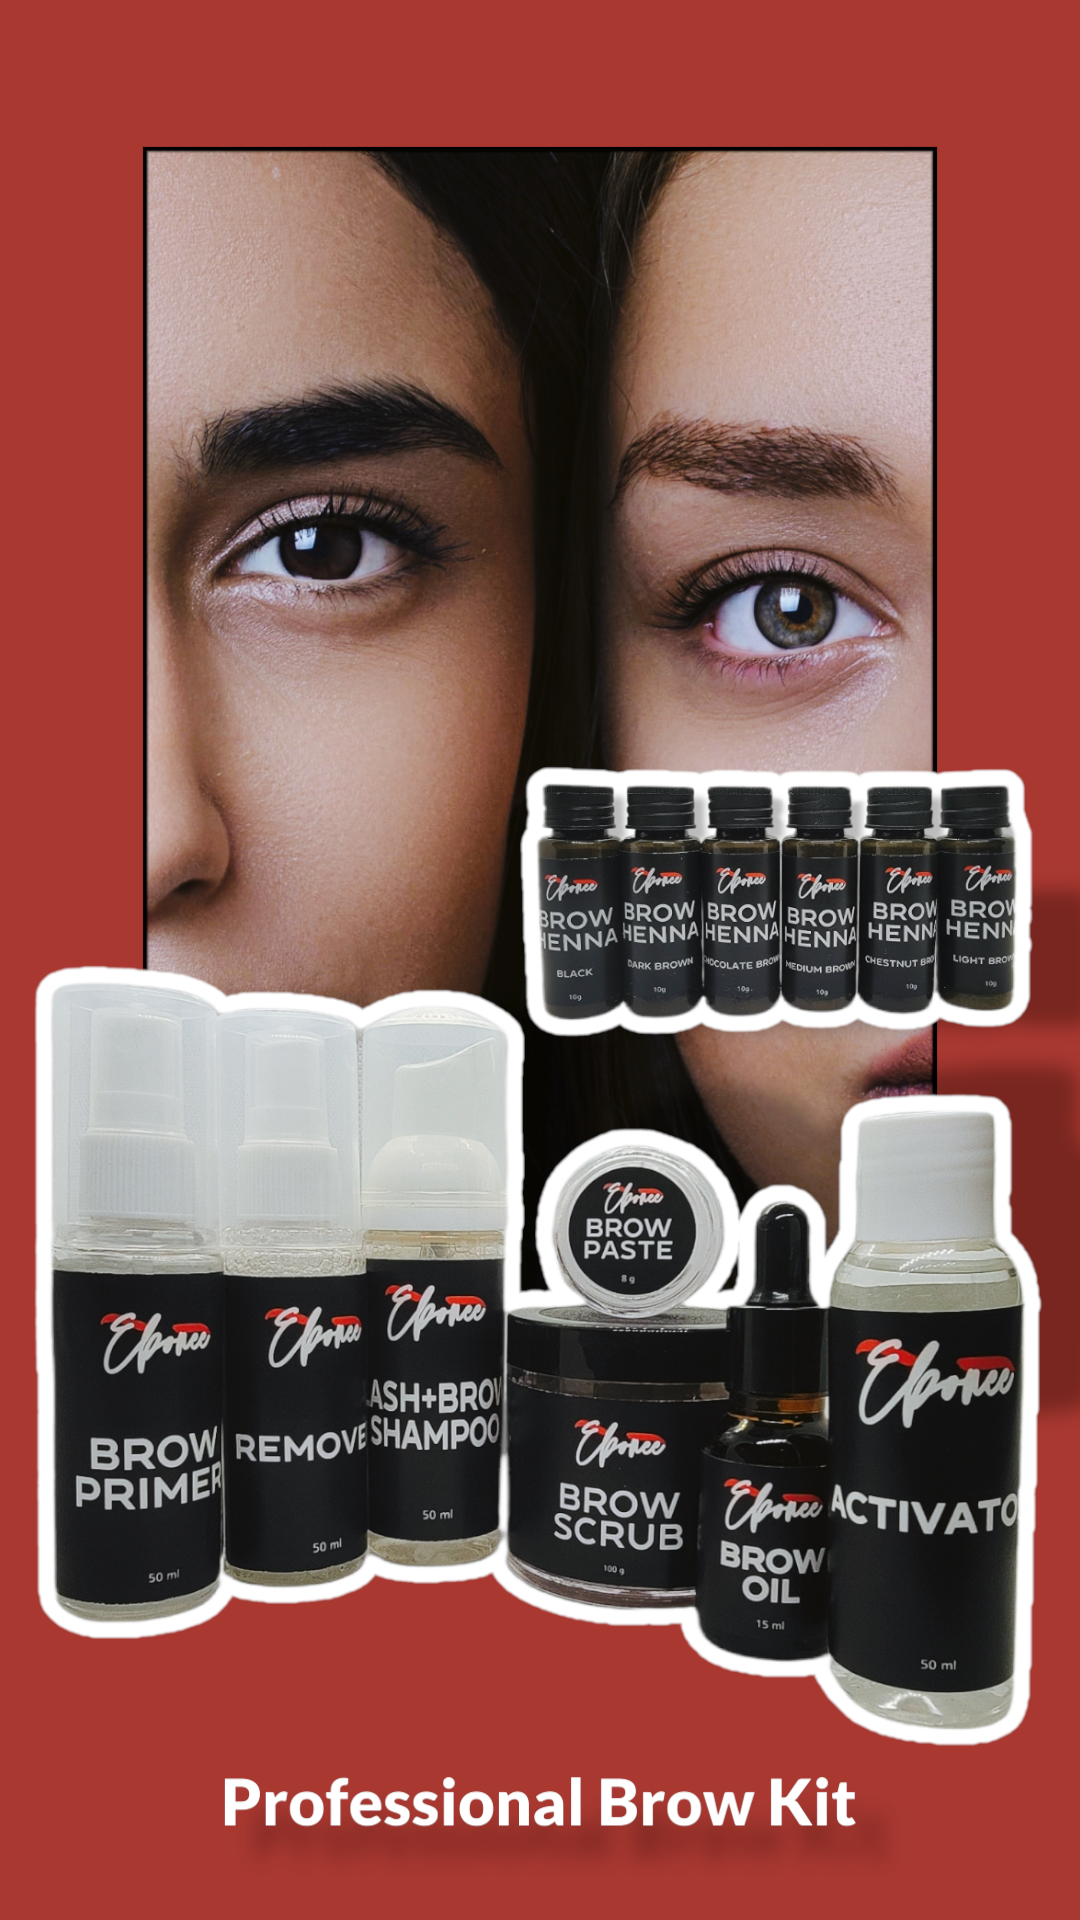 All the Ebonee Products you need to start your career as a Henna Brow Technician.  This kit includes:  Lash + Brow Shampoo 50mg Brow Scrub, 100mg Brow Primer 50mg, Brow Paste 8g, Remover 50gm, Brow Oil 15mg, Activator 50mg, Light Brown Henna 10g, Chestnut Brown Henna 10g, Medium Brown Henna 10g, Chocolate Bown  Henna 10g, Dark Brown Henna 10g, Black Henna10g, This kit's value is over $315! Make your ROI in just 7 applications! FOR PROFESSIONAL USE ONLY. Eboee Brow Kit, Brow Henna, Brow Artist,  students.